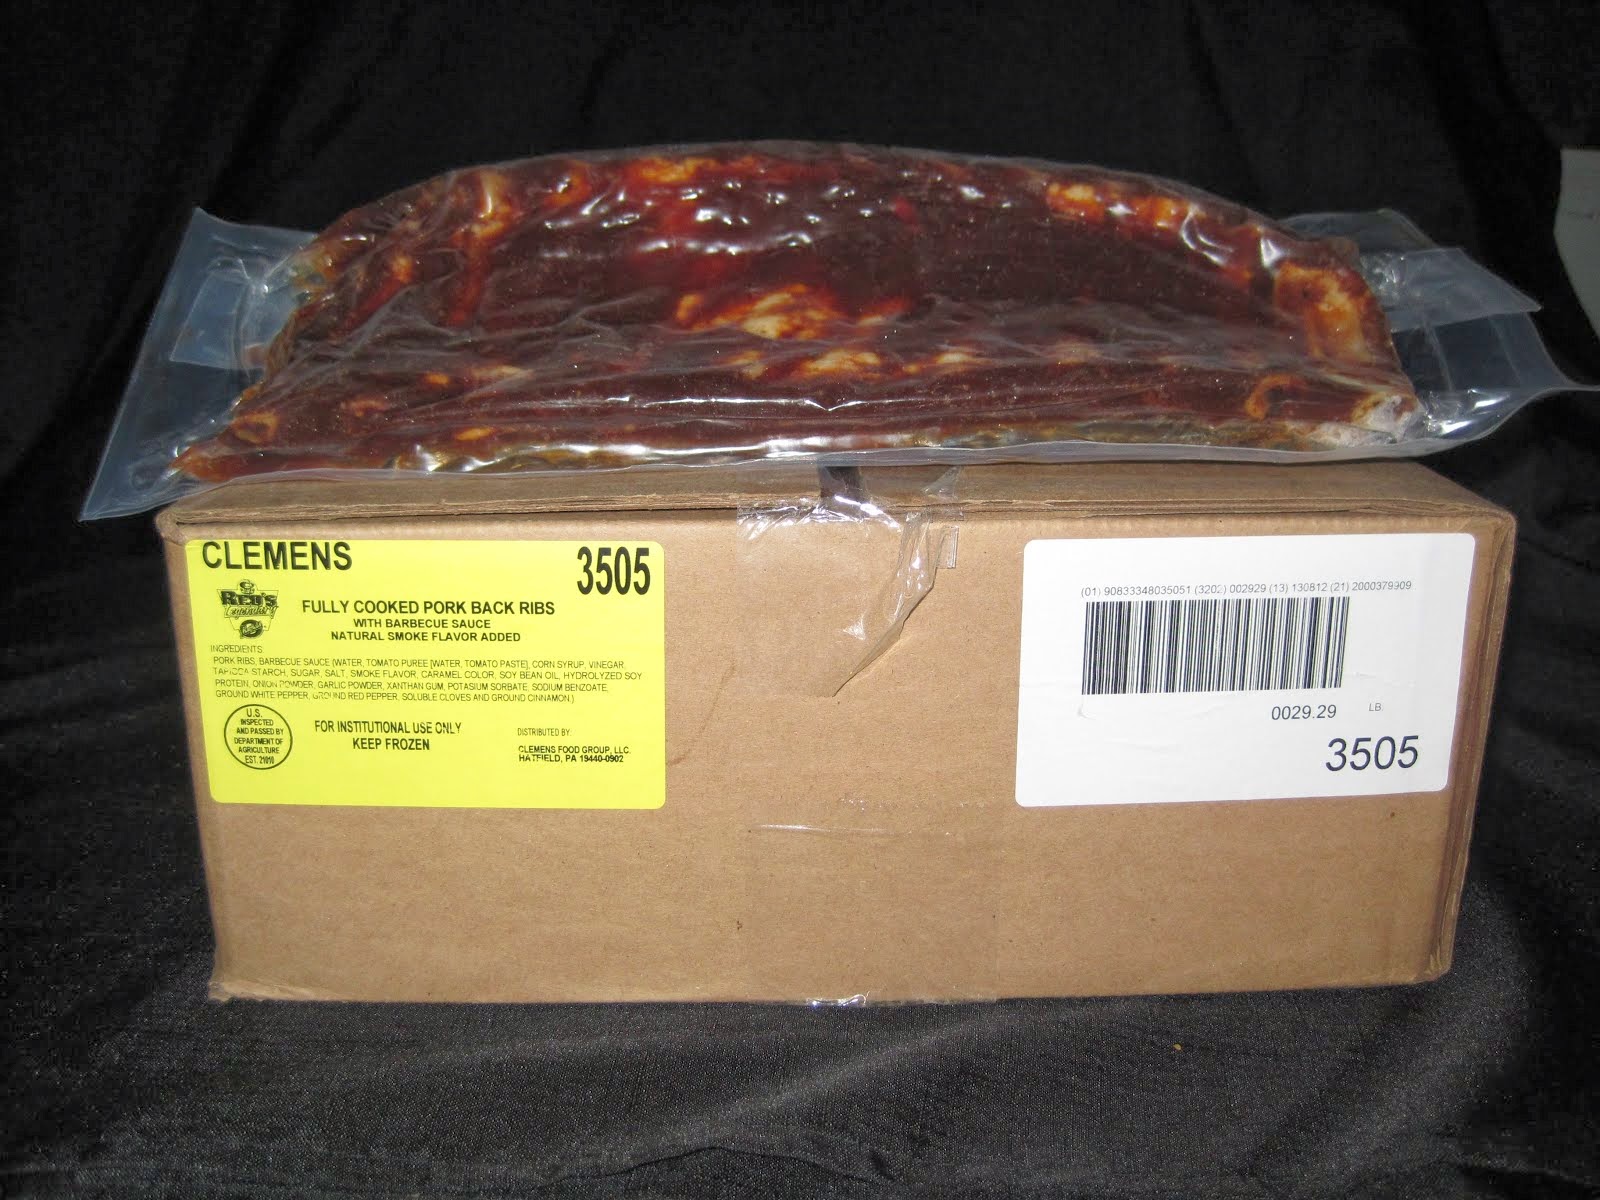 Hatfield Fully Cooked and Sauced Ribs.  A Family Favorite!! 26 lb average weight - Item # 15945